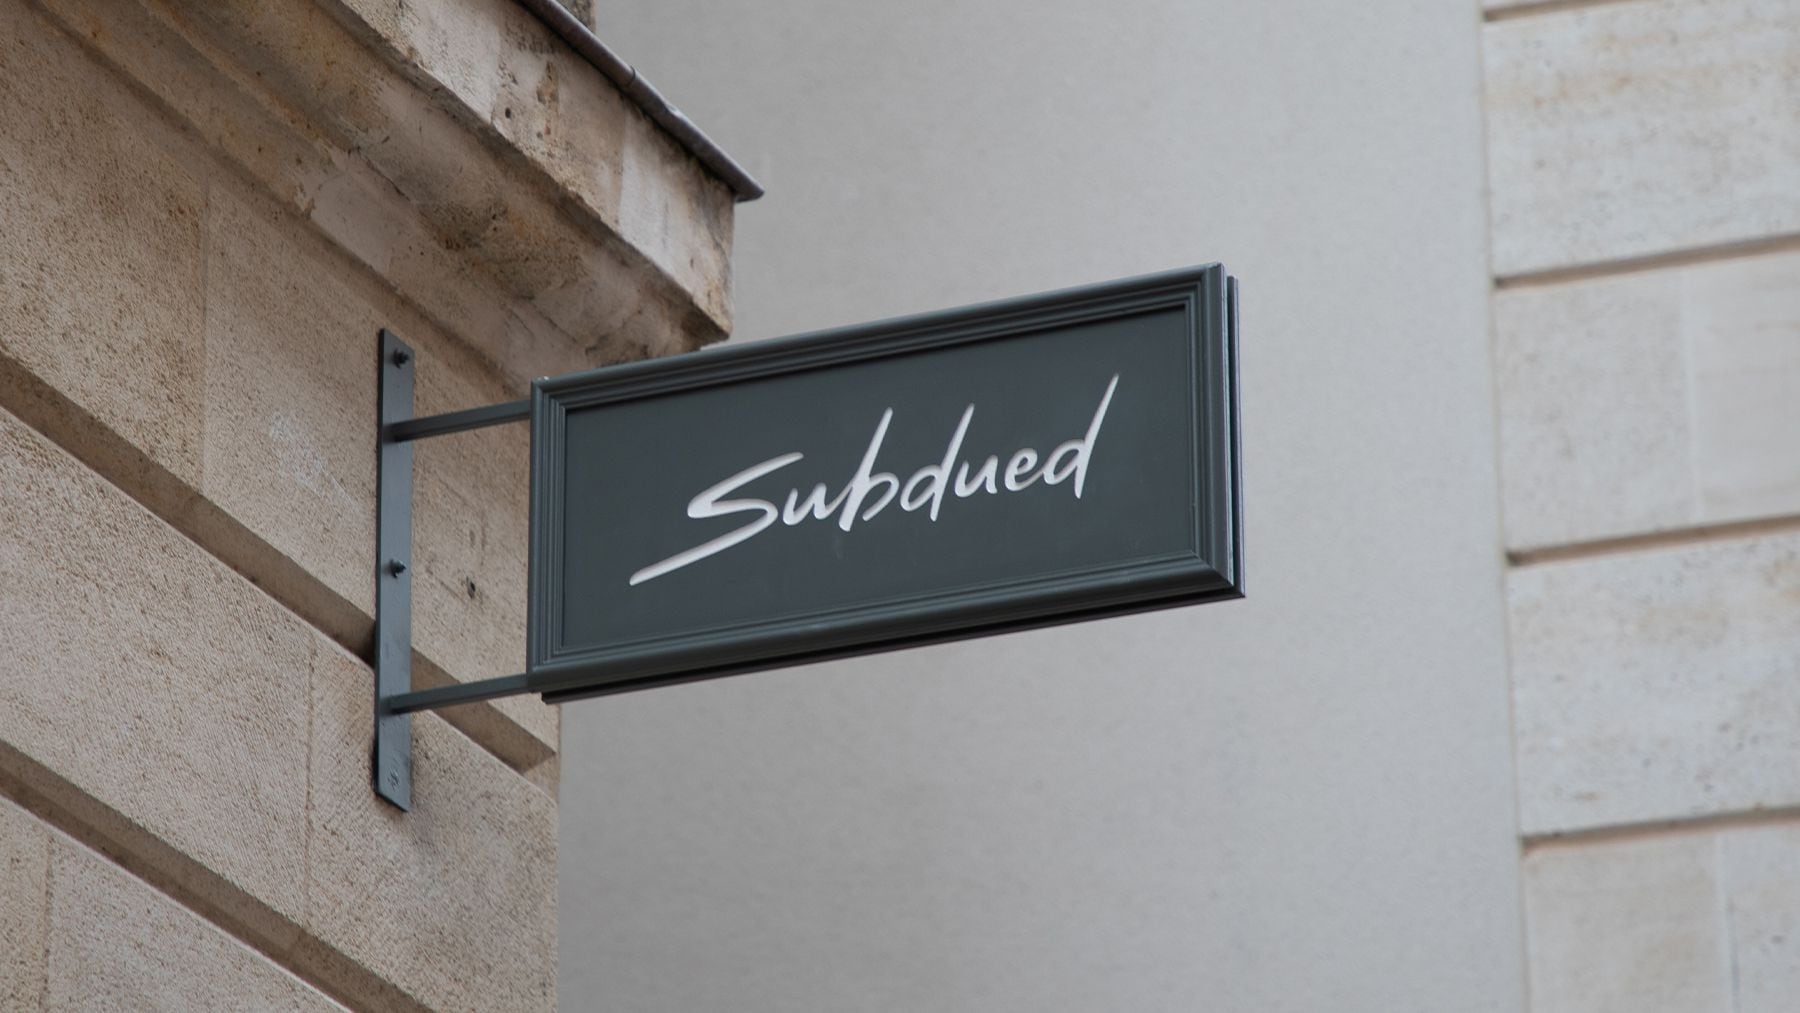 Agnellis’ Exor Teams Up to Invest in Teen Fashion Brand Subdued